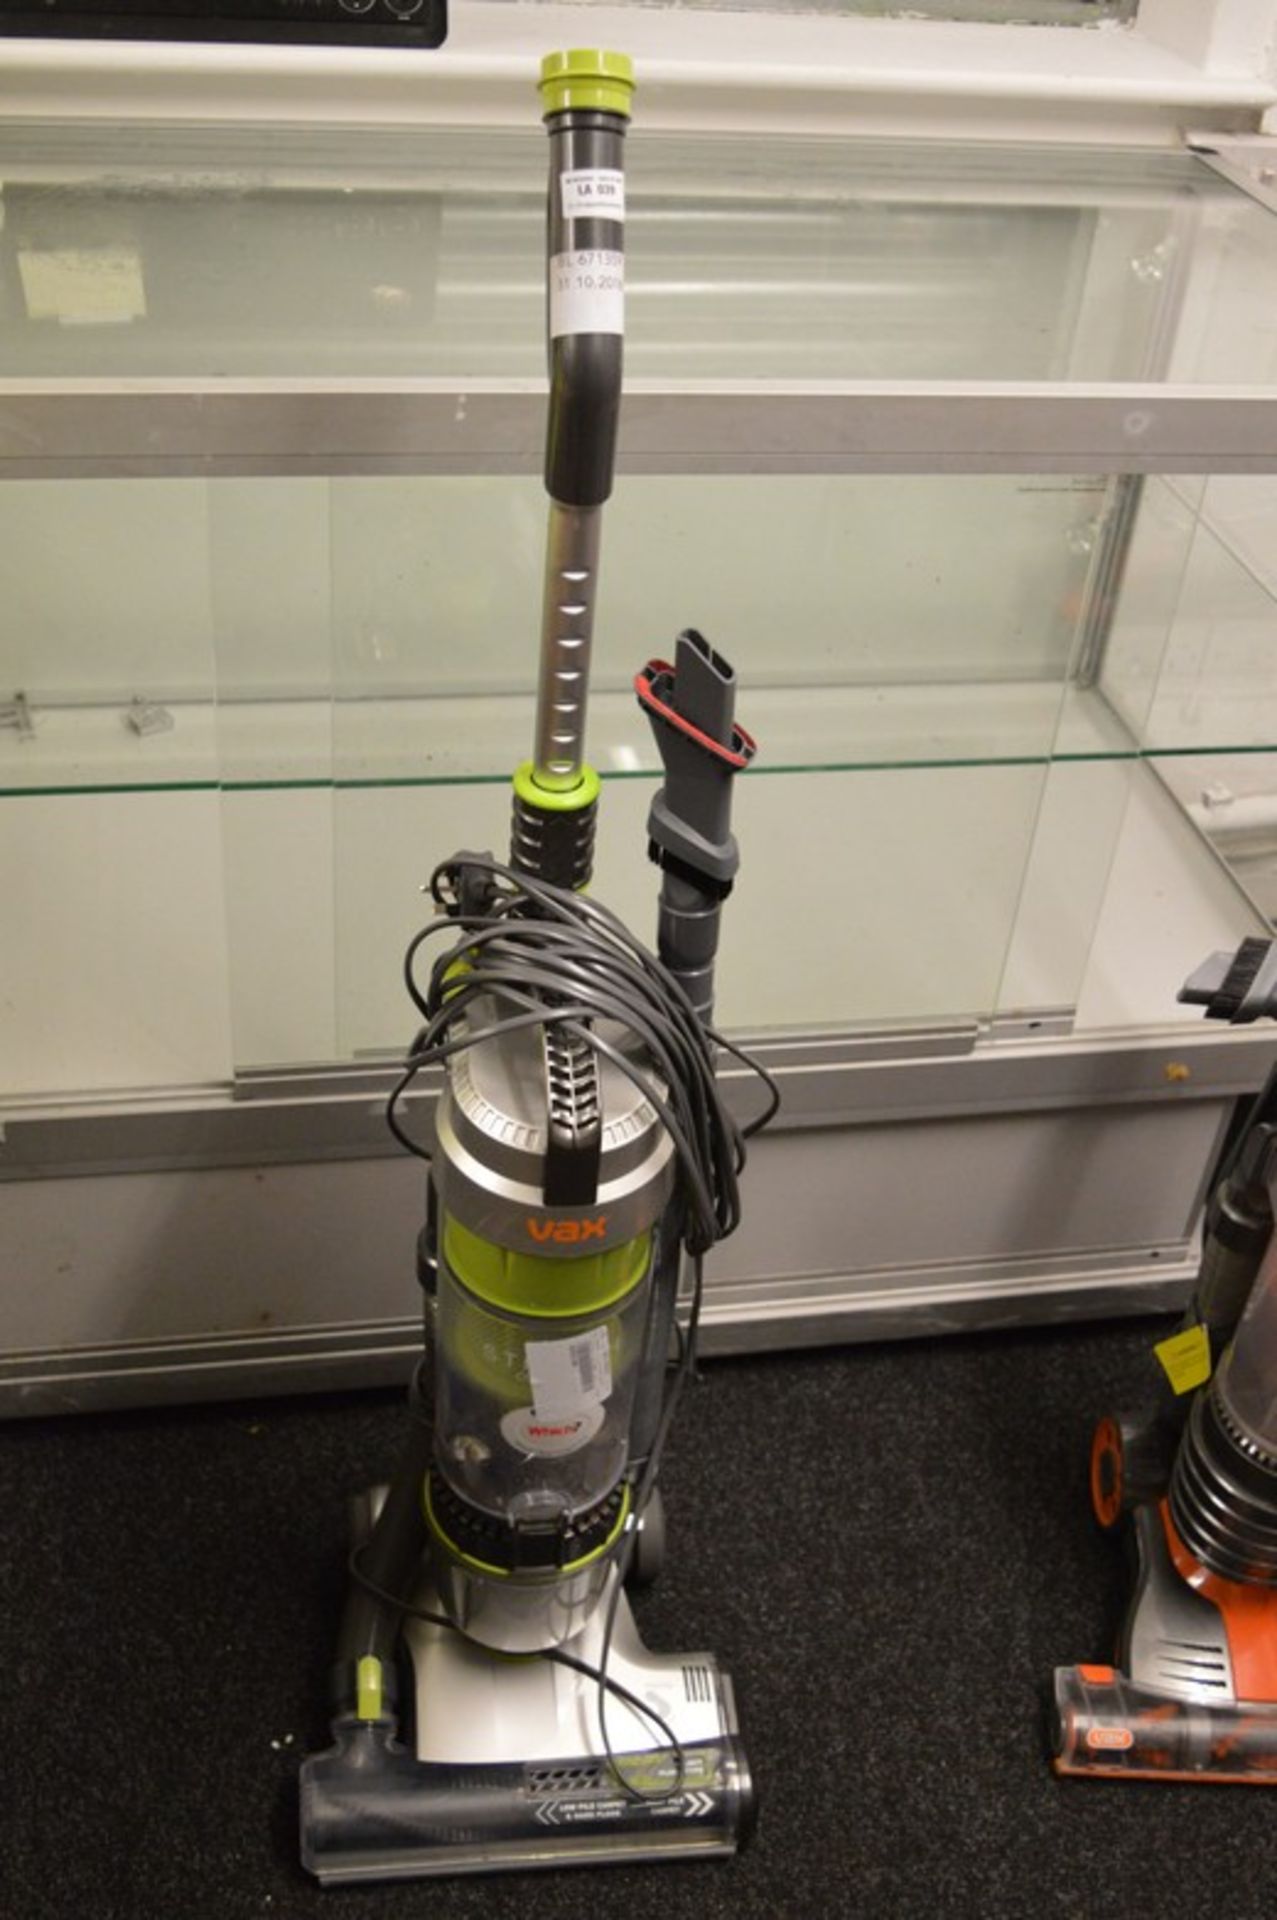 1 x VAX UPRIGHT VACUUM CLEANER RRP £150 02.11.16 *PLEASE NOTE THAT THE BID PRICE IS MULTIPLIED BY